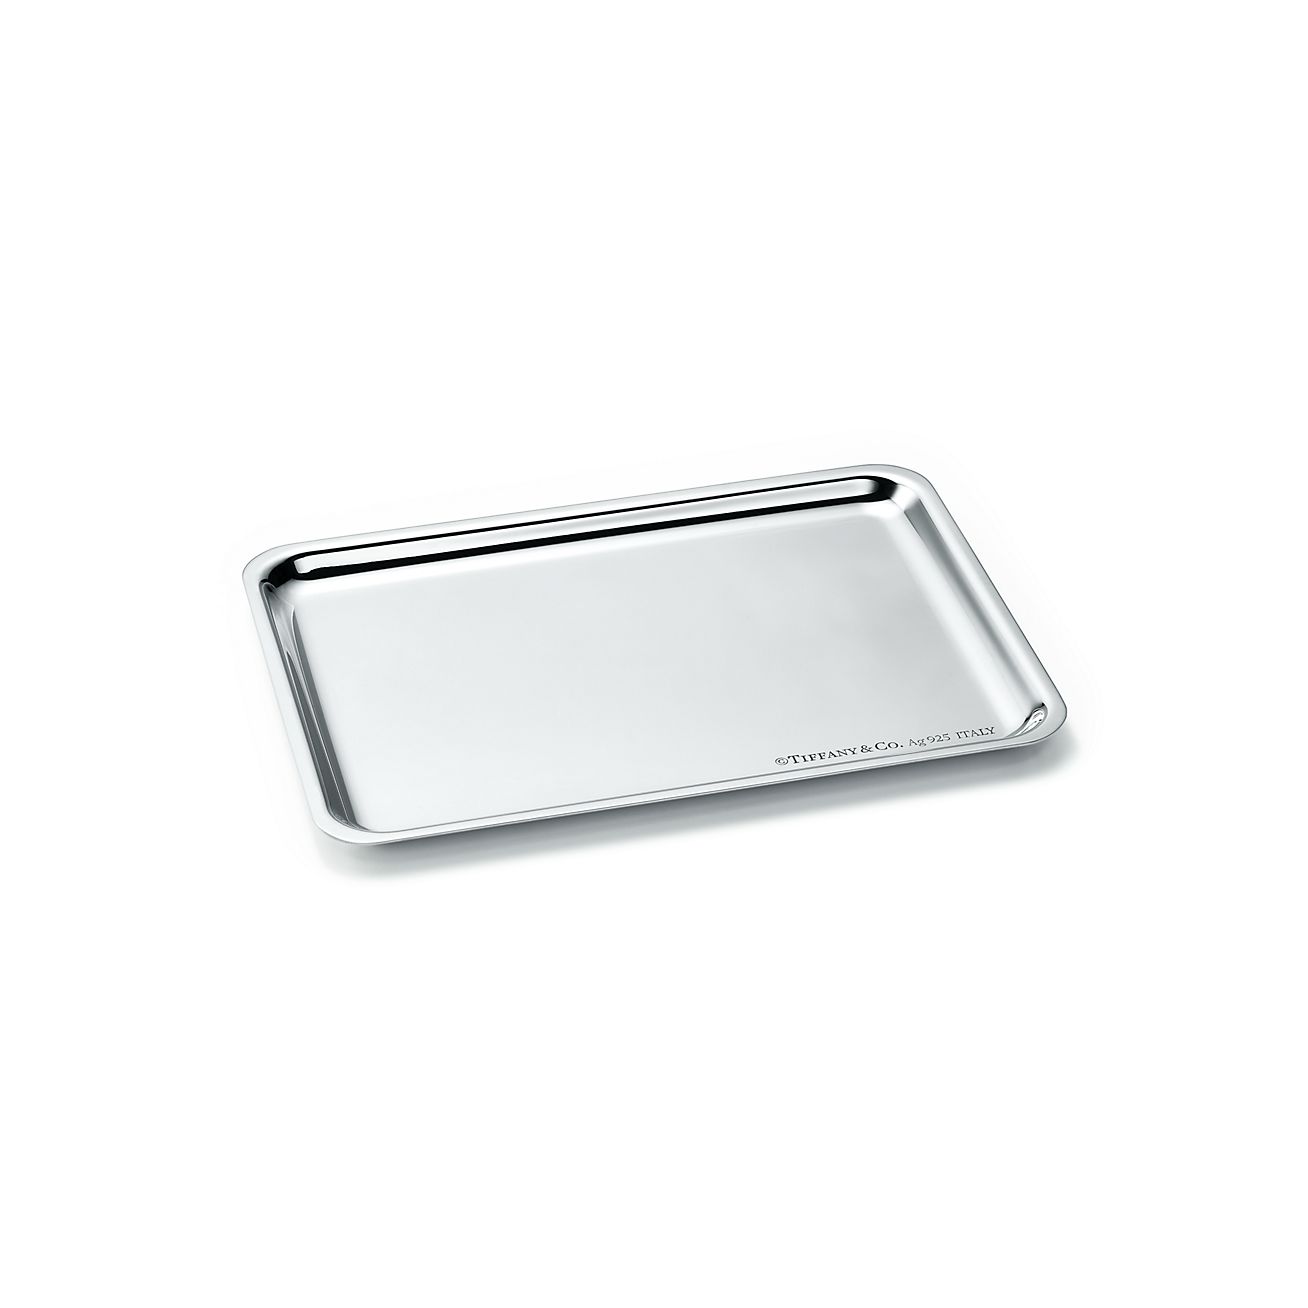 Rectangular tray in sterling silver, 6 